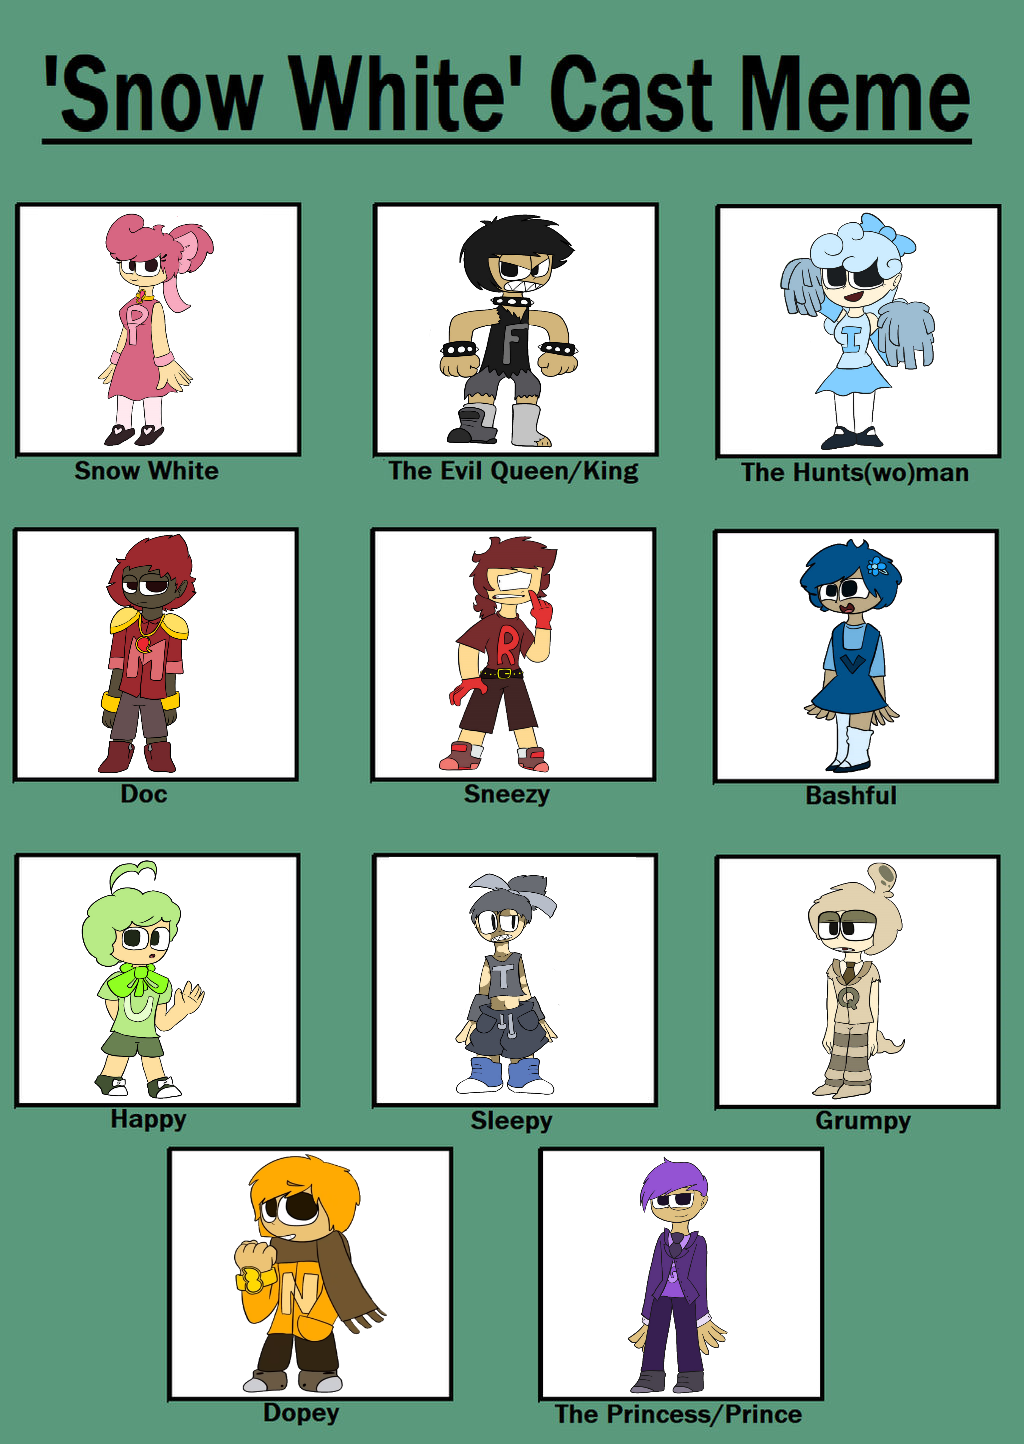 Humanized Alphabet Lore As The Snow White Cast by zemelo2003 on